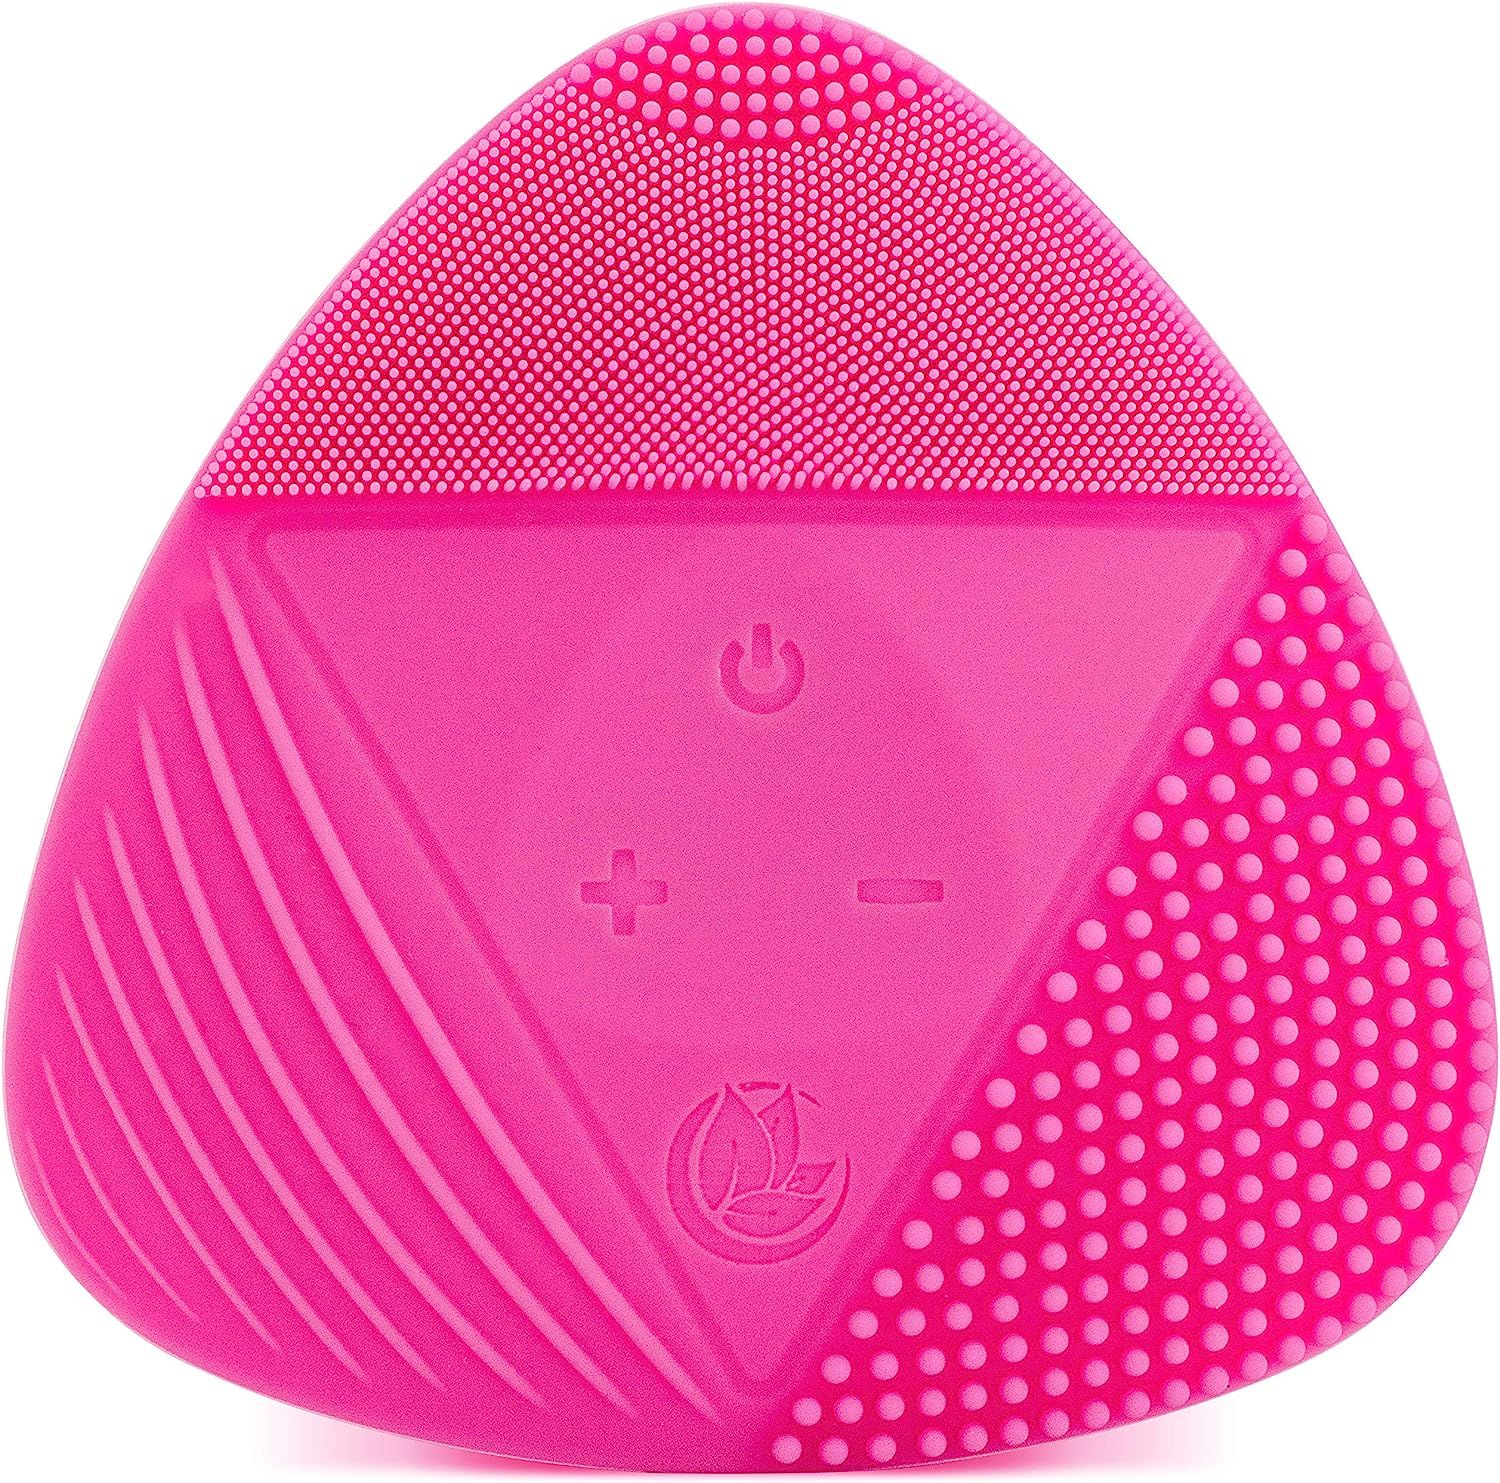 Silicone Sonic Facial Cleansing Brush - Best Beauty Massager for Normal, Sensitive, Combination S... | Amazon (US)